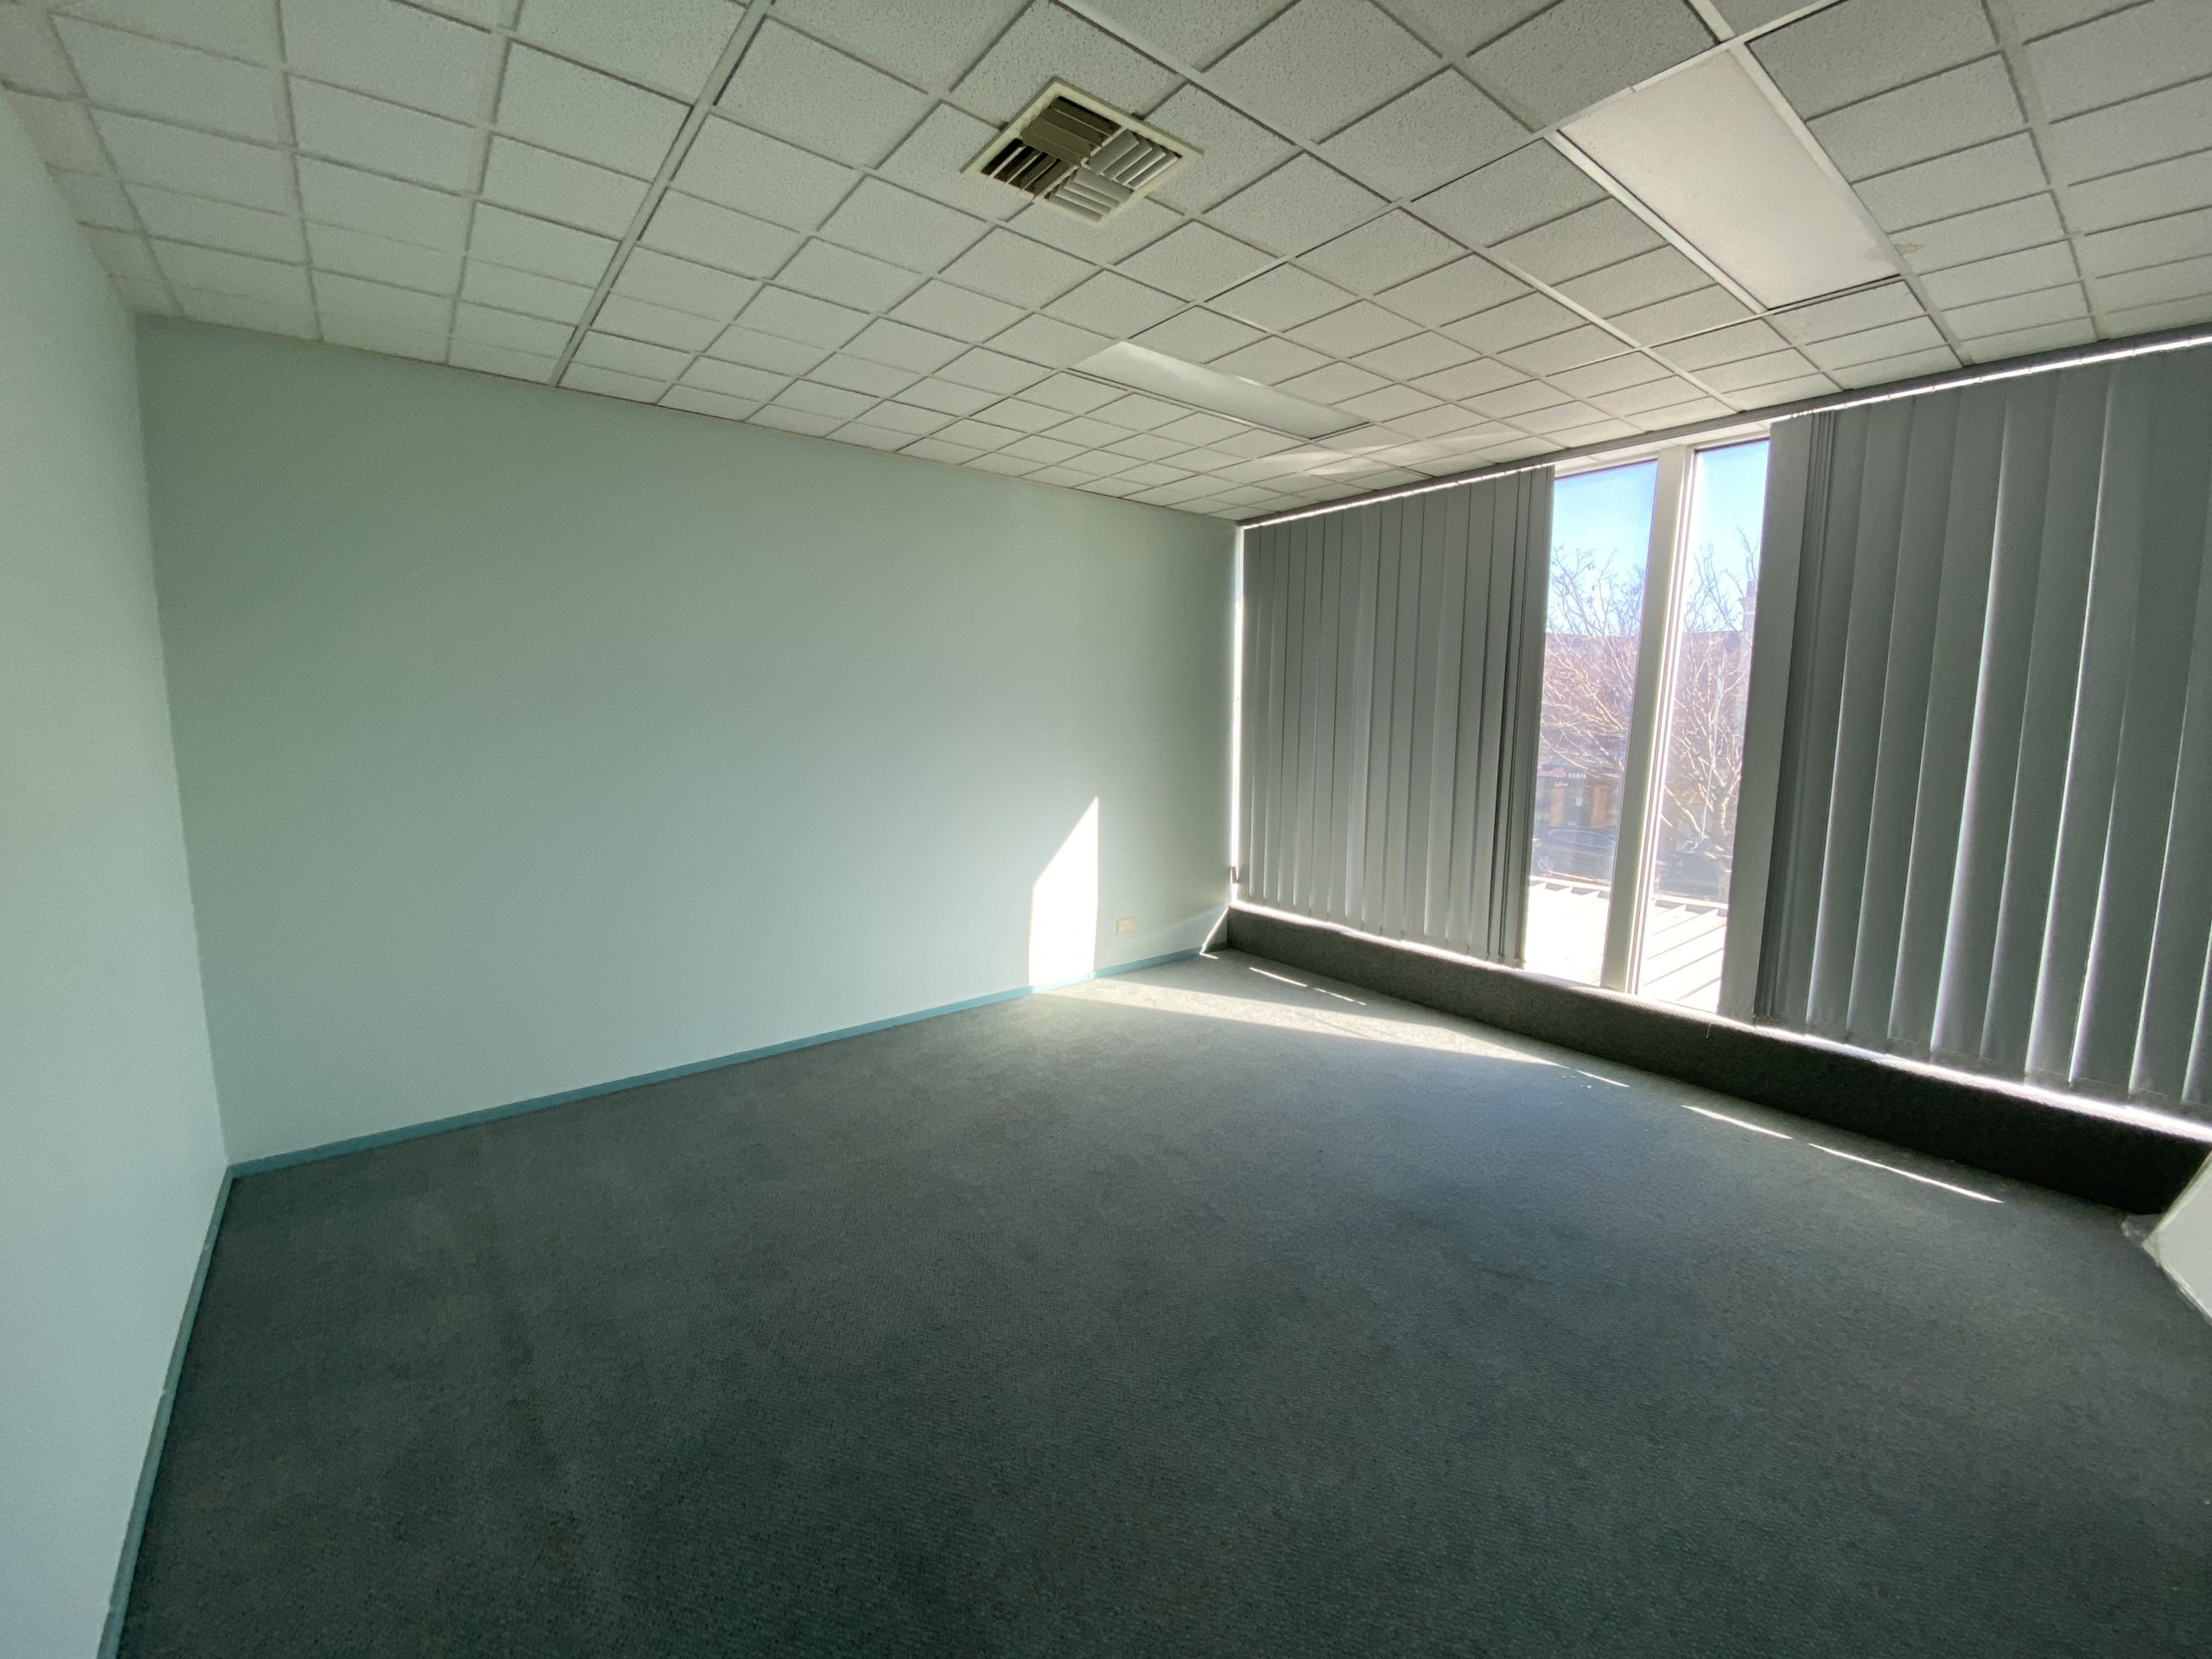 Queanbeyan Office Conference room